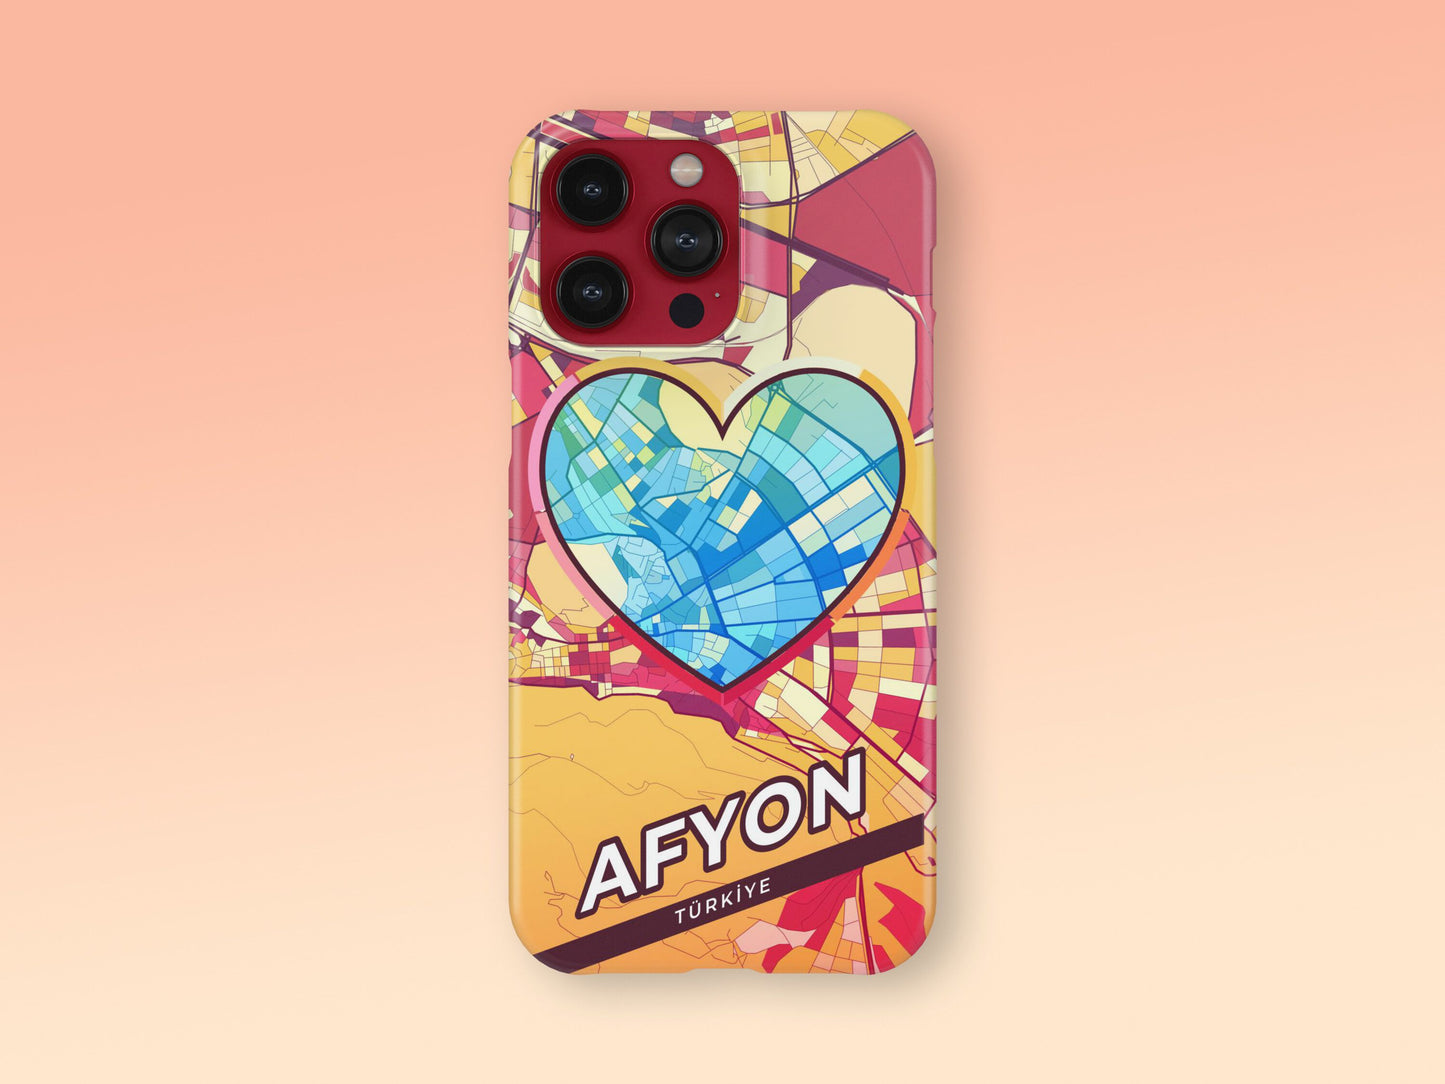 Afyon Turkey slim phone case with colorful icon. Birthday, wedding or housewarming gift. Couple match cases. 2